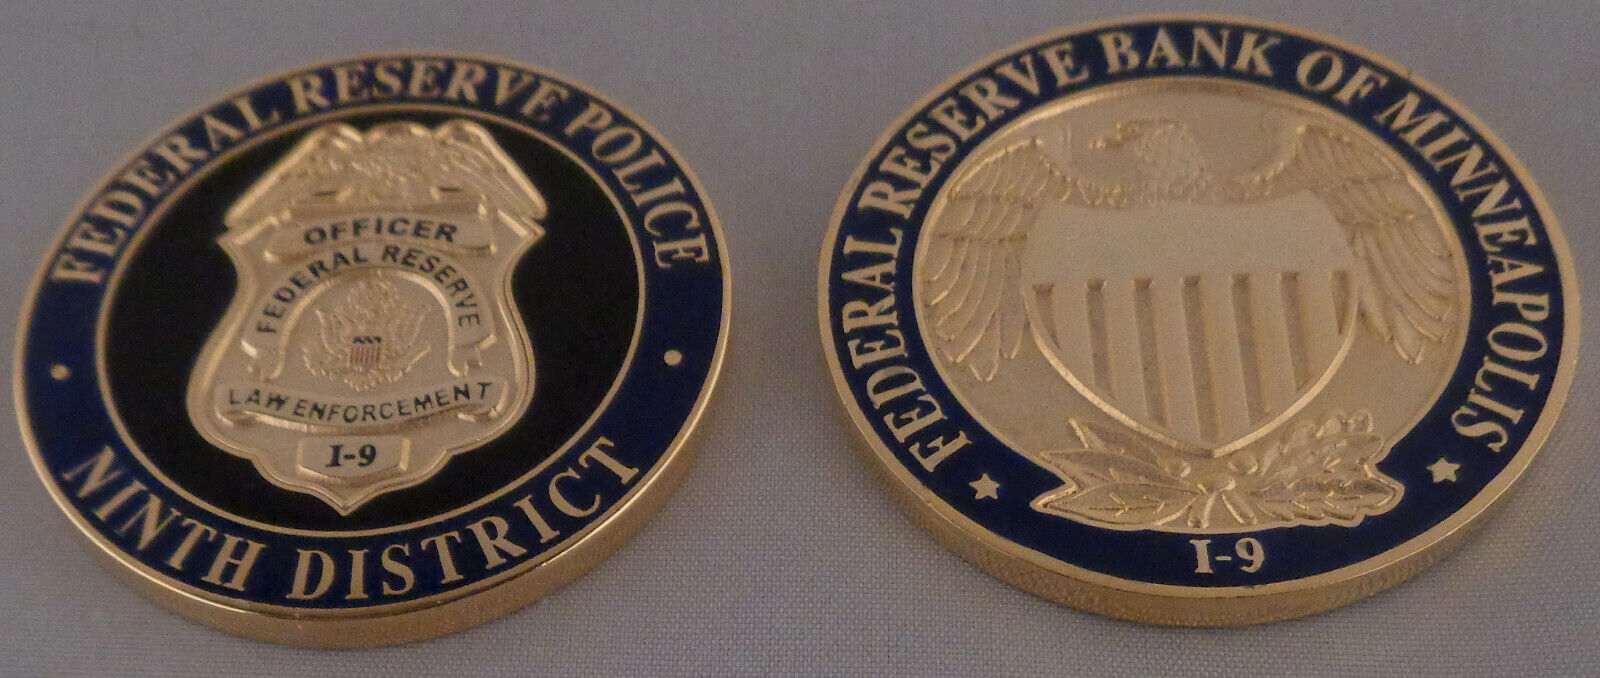 Federal Reserve Police Officer 9th District CHALLENGE COIN Minneapolis MN Ninth